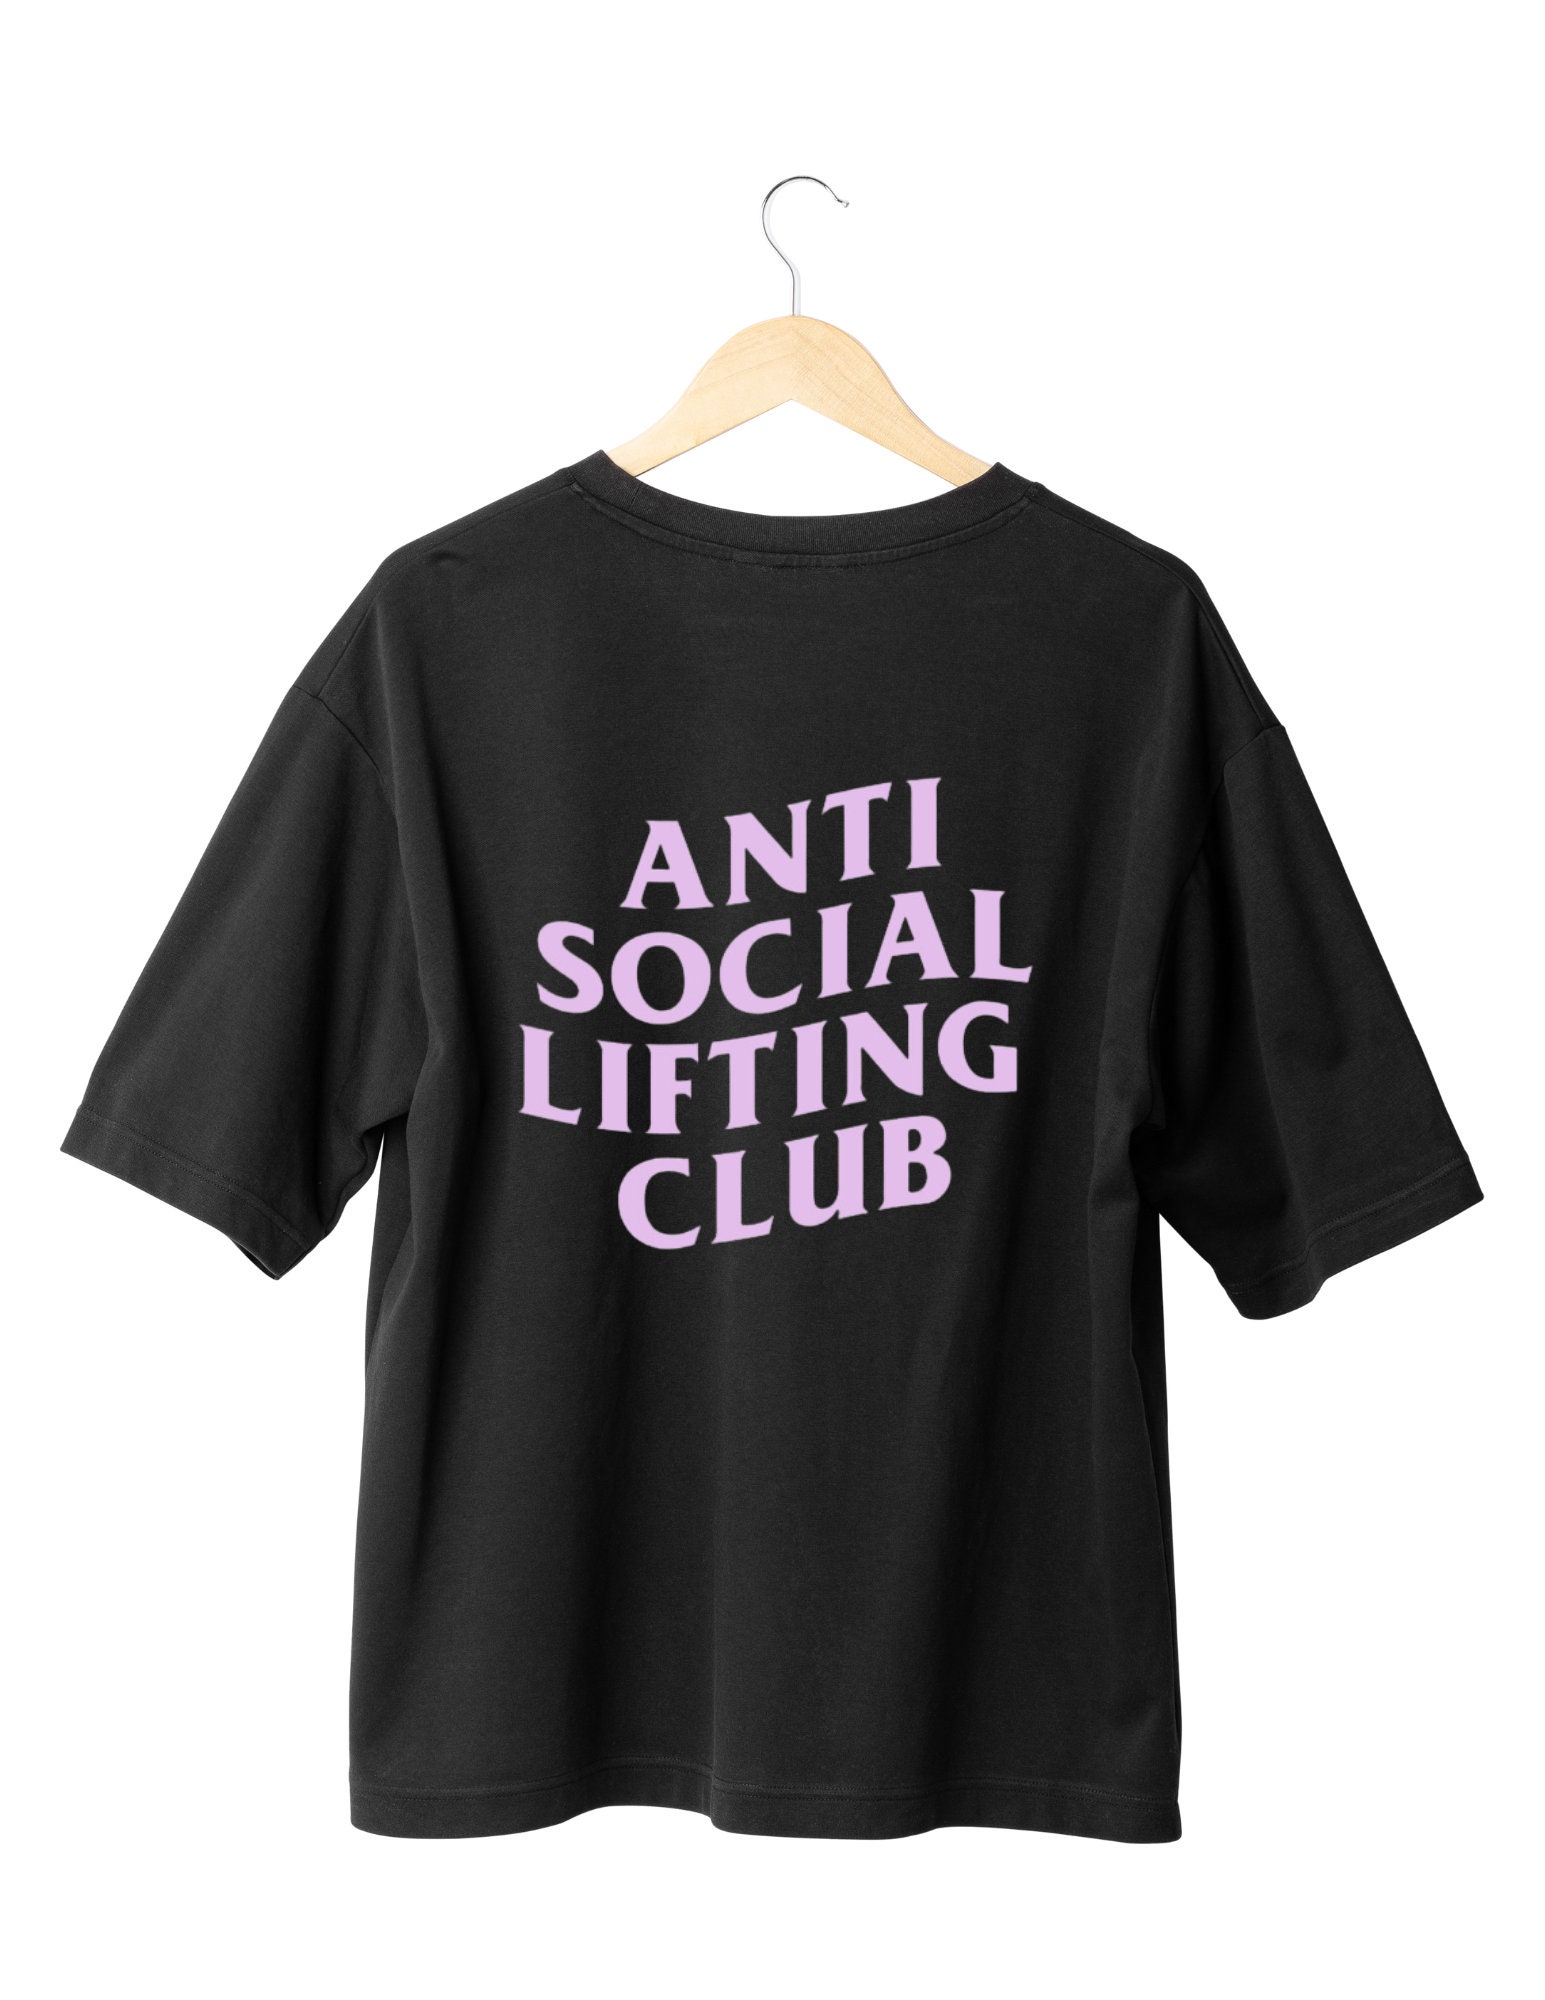 Anti Social Lifting Club Oversized T-shirt for Gym Rats and Beginner Gym  Goers, Gift for Gym Rats, Gift for Beginner Gym Goers 